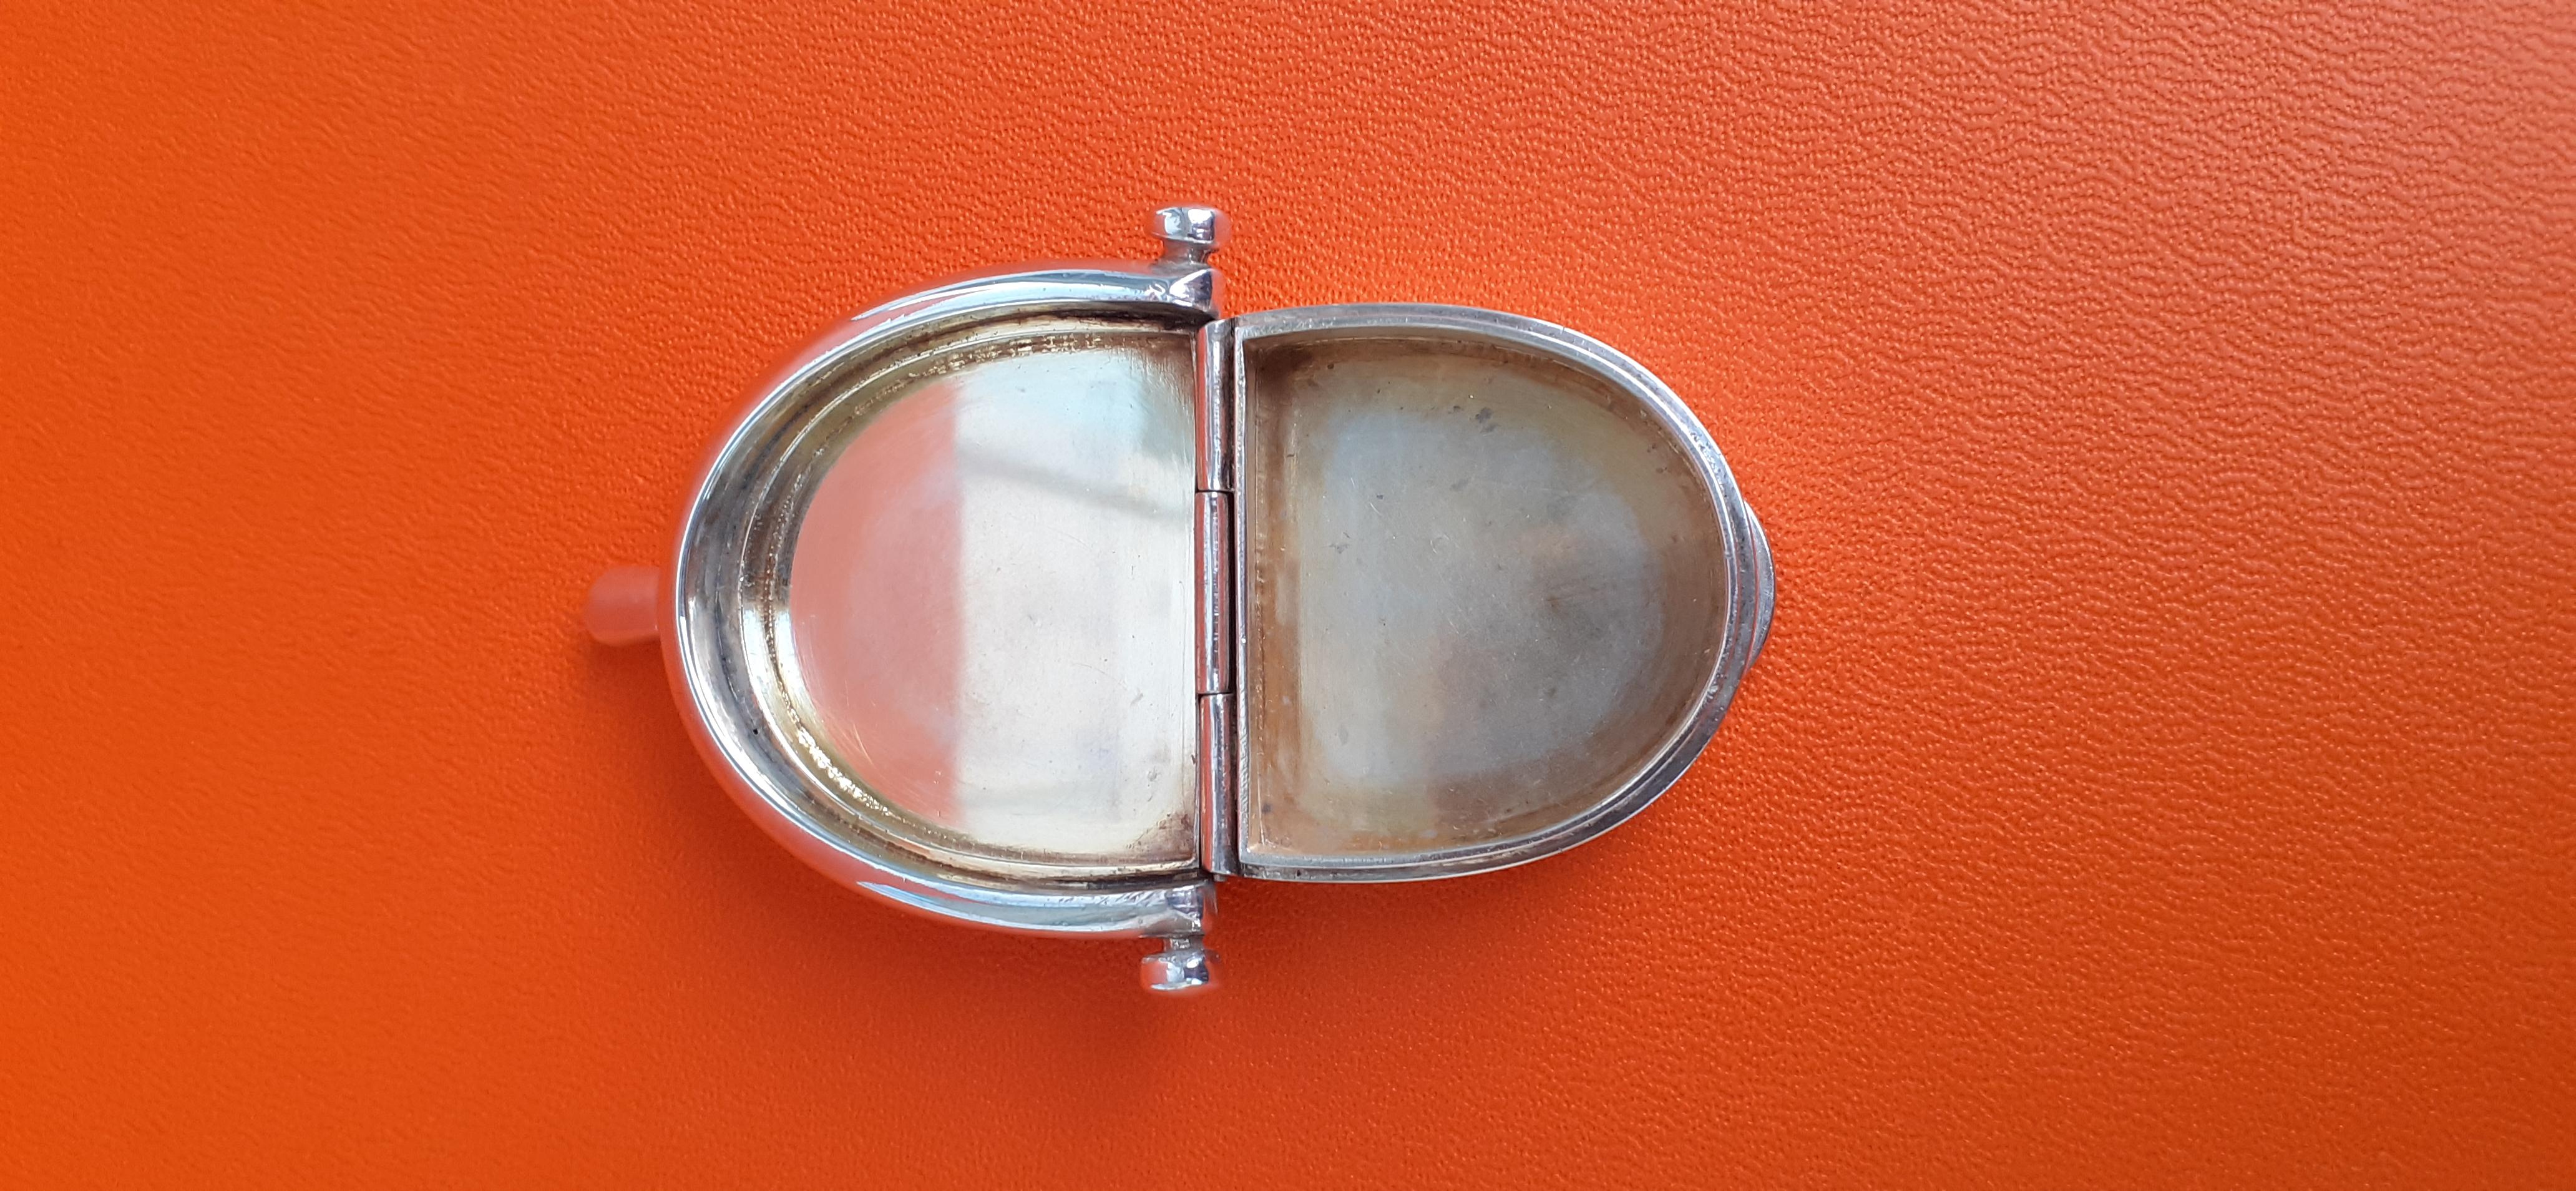 Exceptional Hermès Guilloche Spur Shaped Pill Box By Ravinet d'Enfert For Sale 11